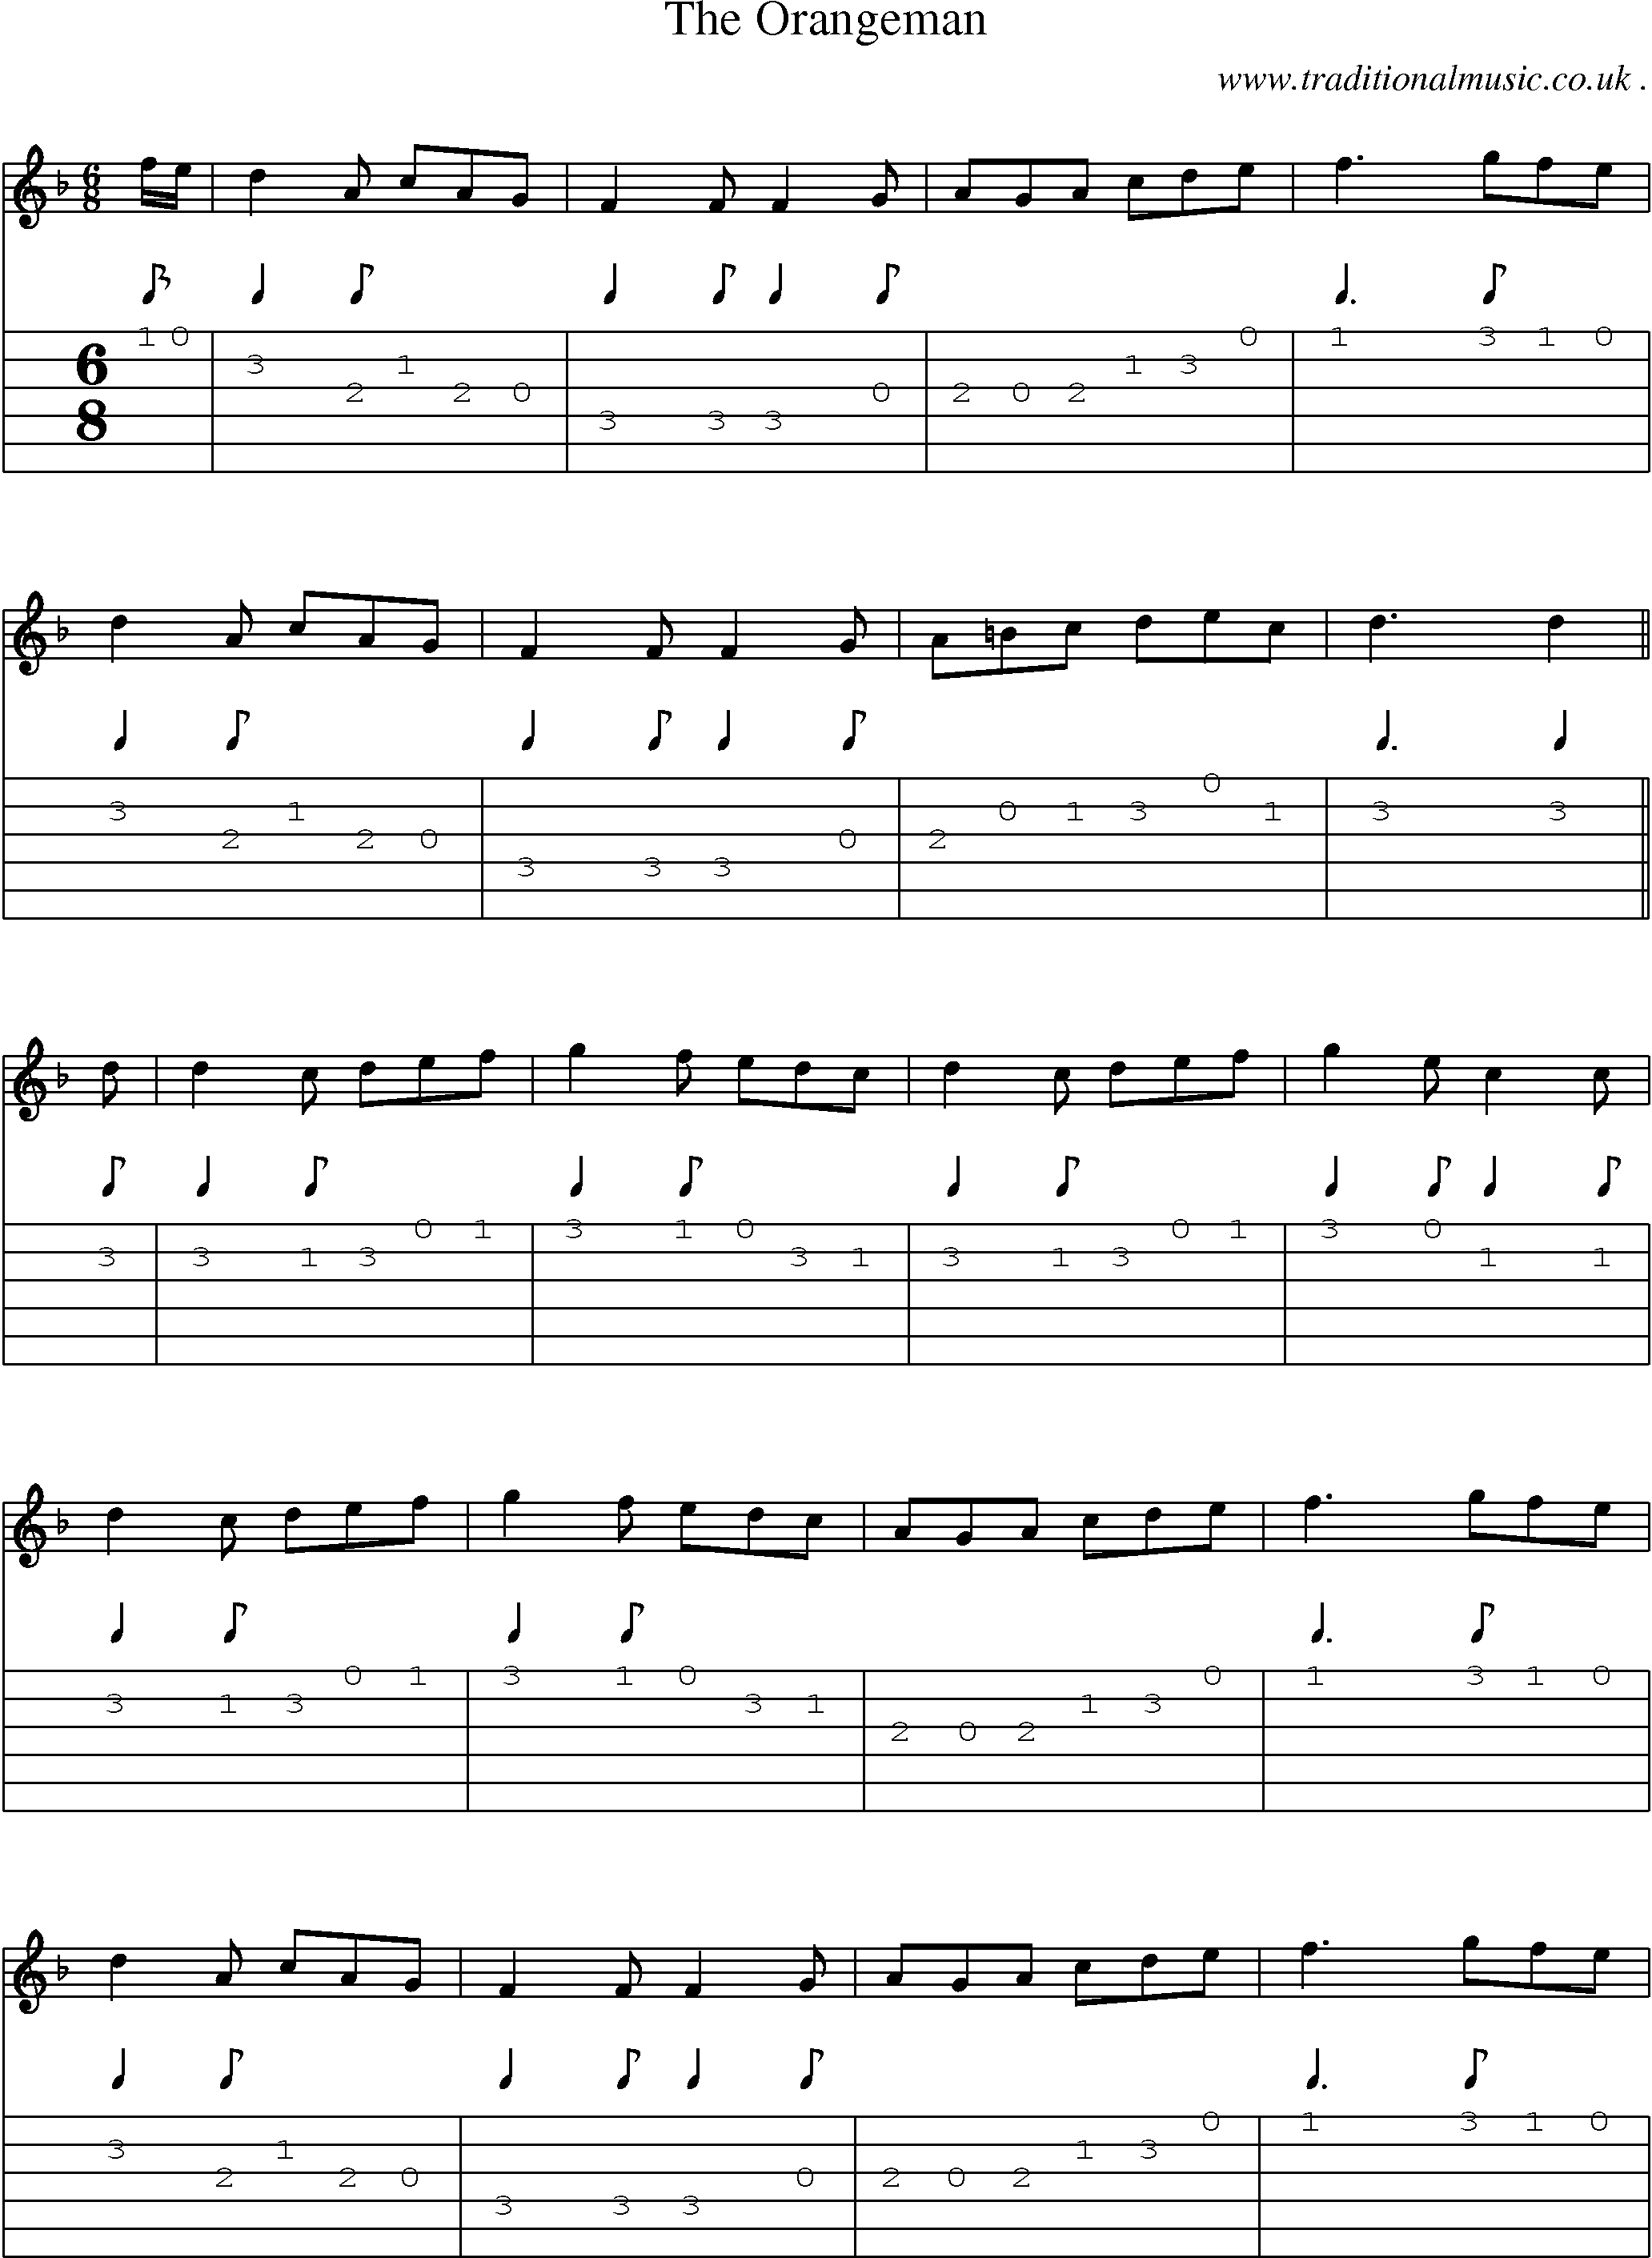 Sheet-Music and Guitar Tabs for The Orangeman